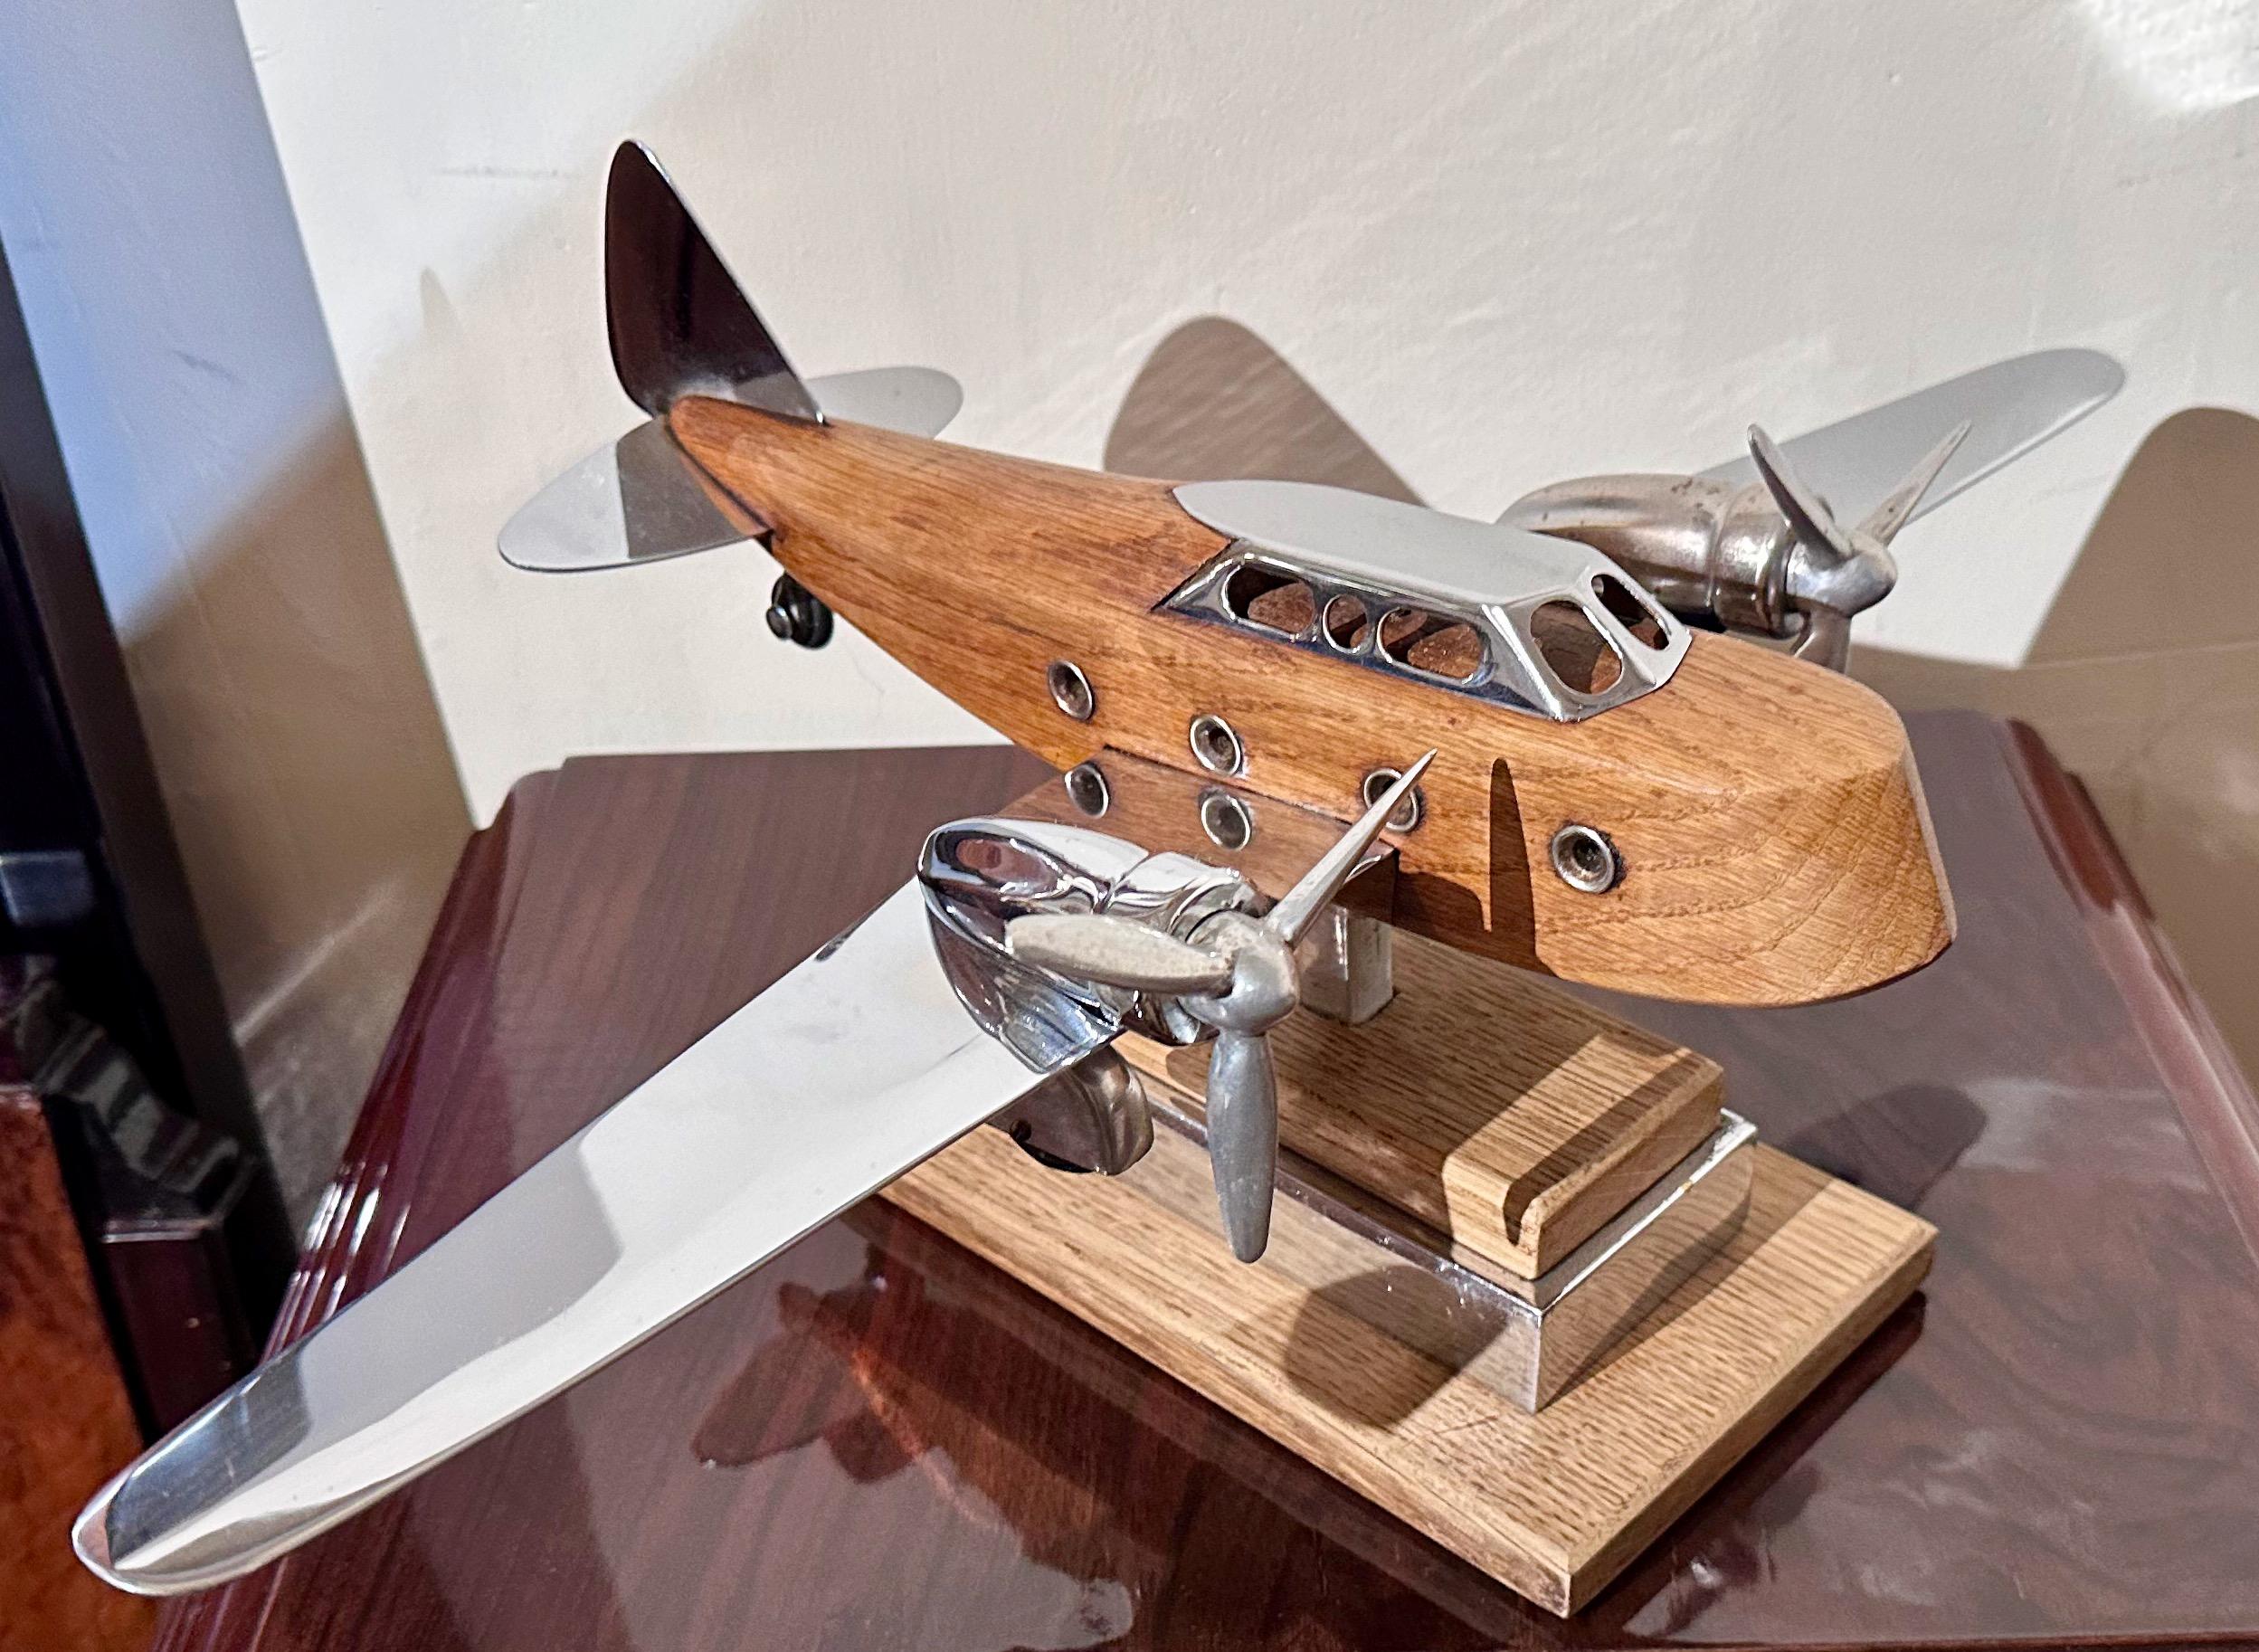 The Boeing Clipper was a long-range Flying Boat made by the Boeing Aircraft Company. It was the Pan American flagship it was also flown by British Imperial Airways. This exquisite model is an interpreted meticulous homage to the iconic Boeing